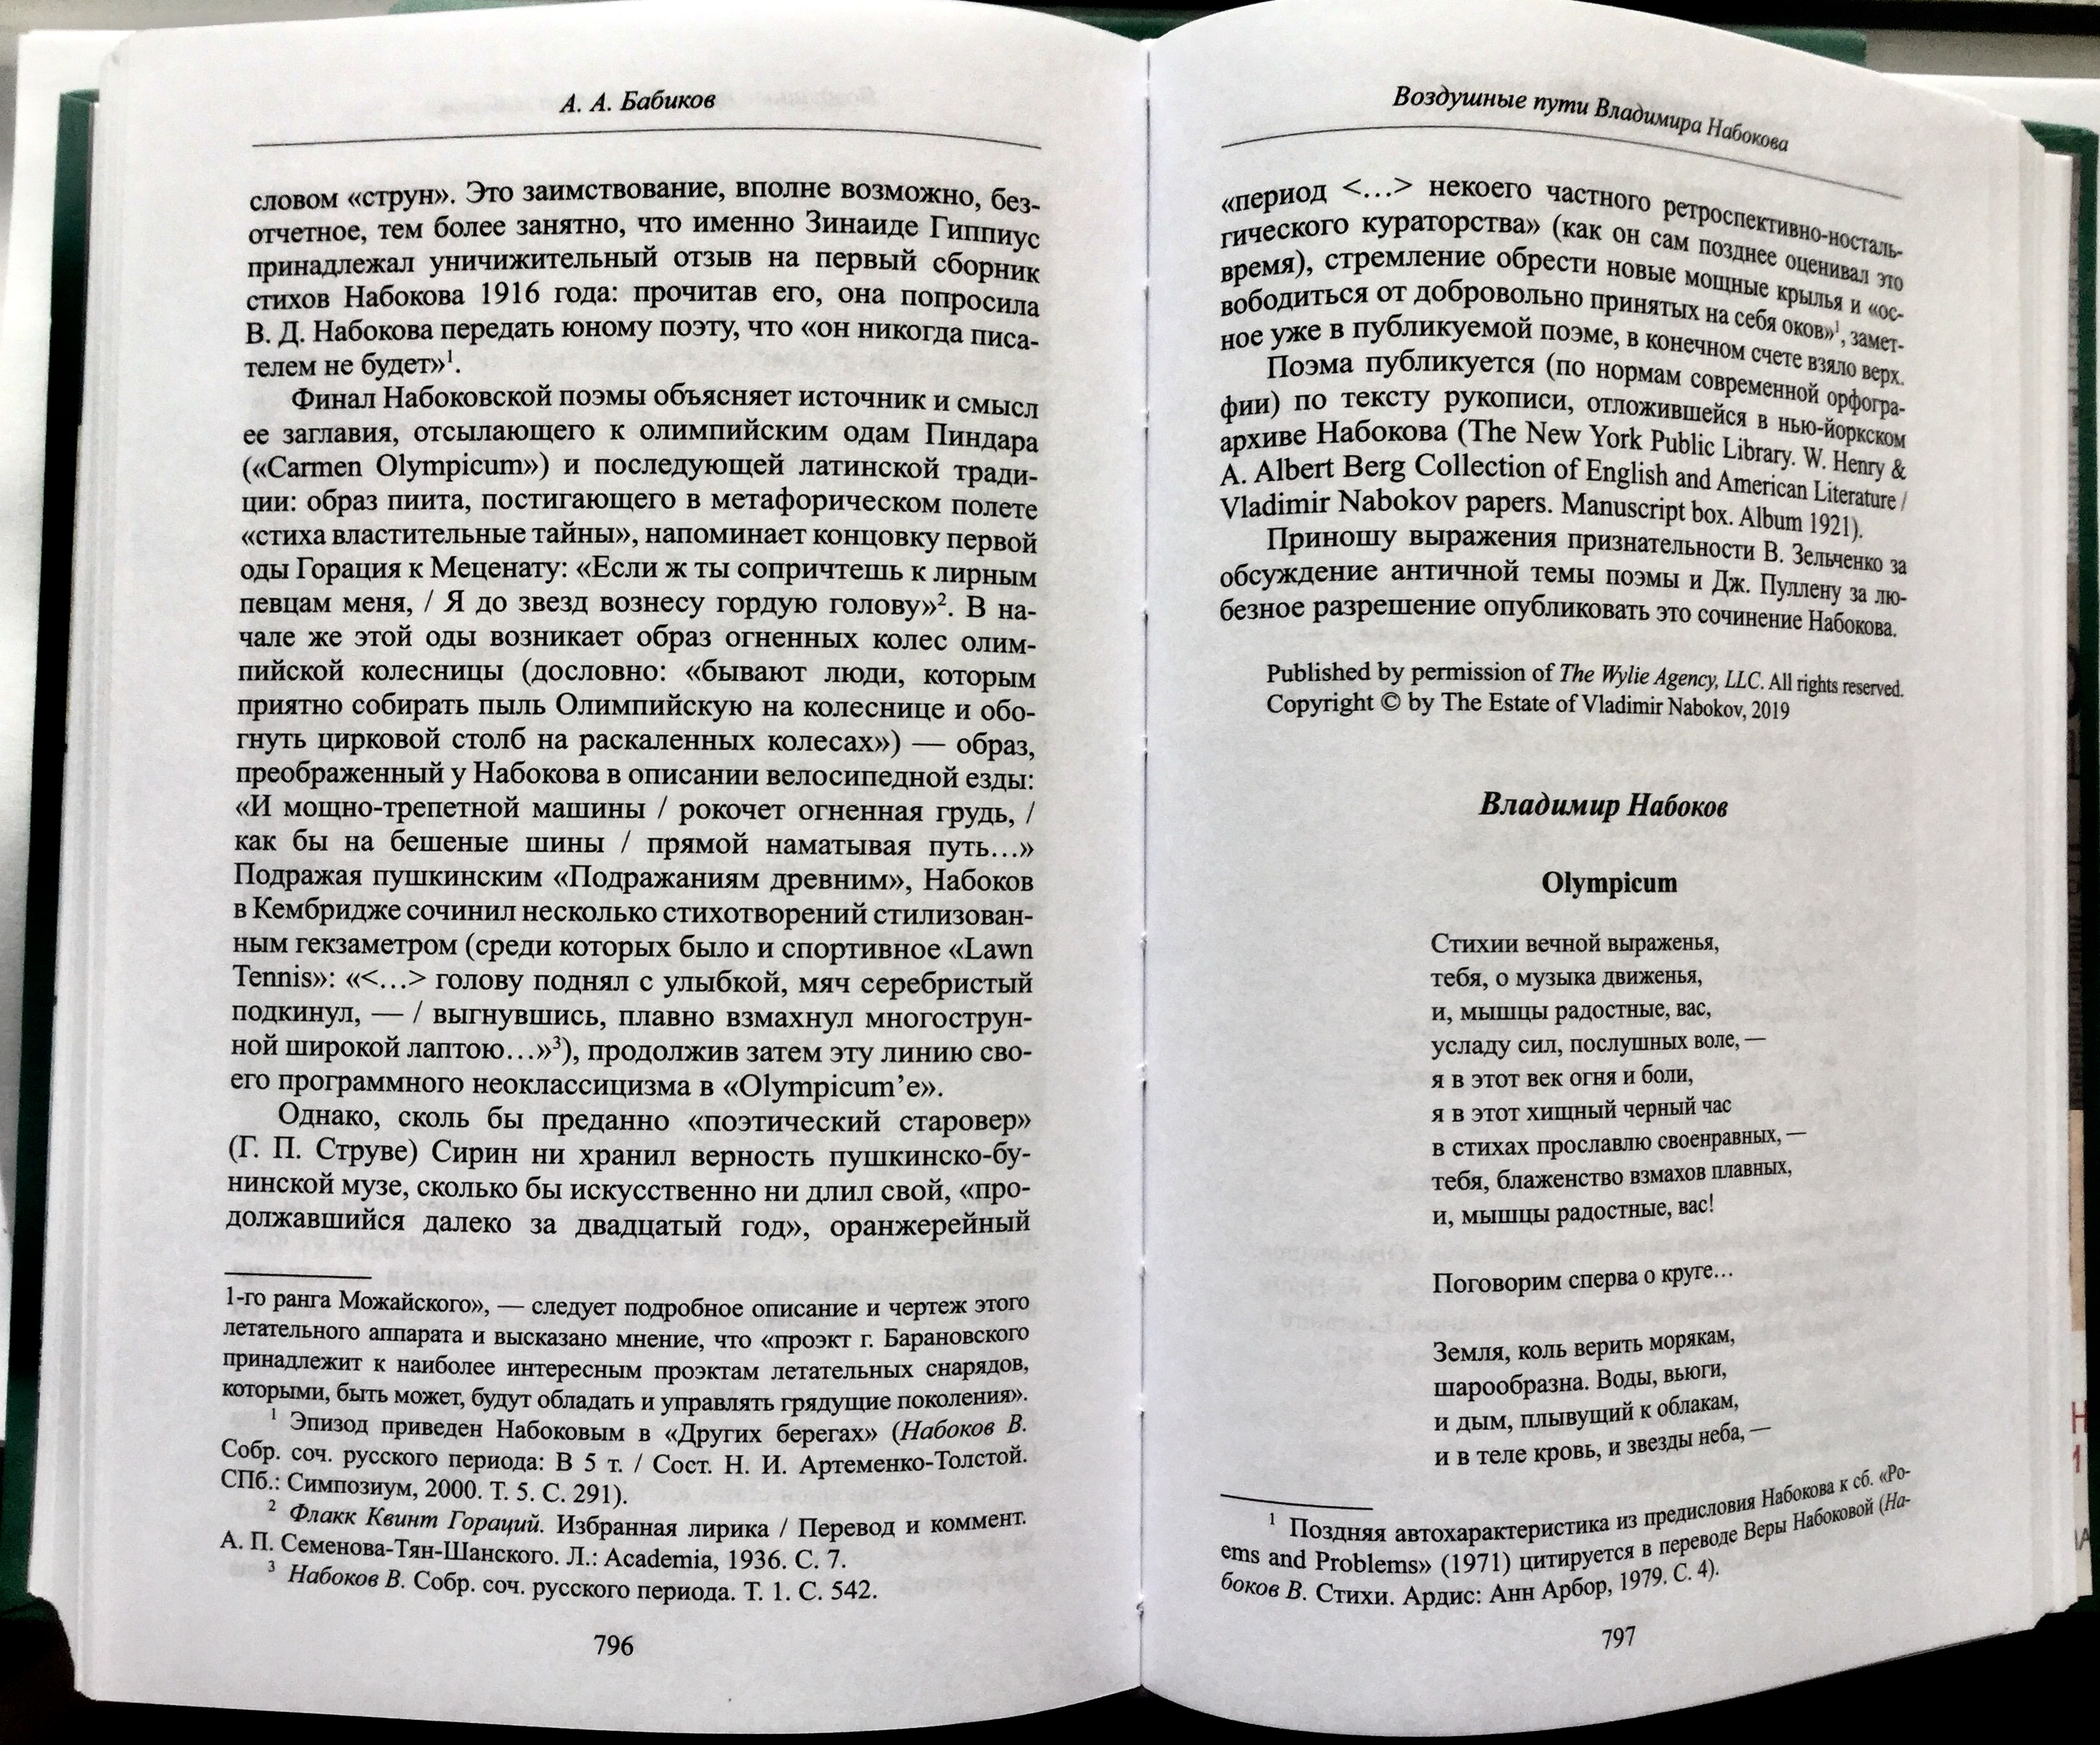 Two pages from the publication